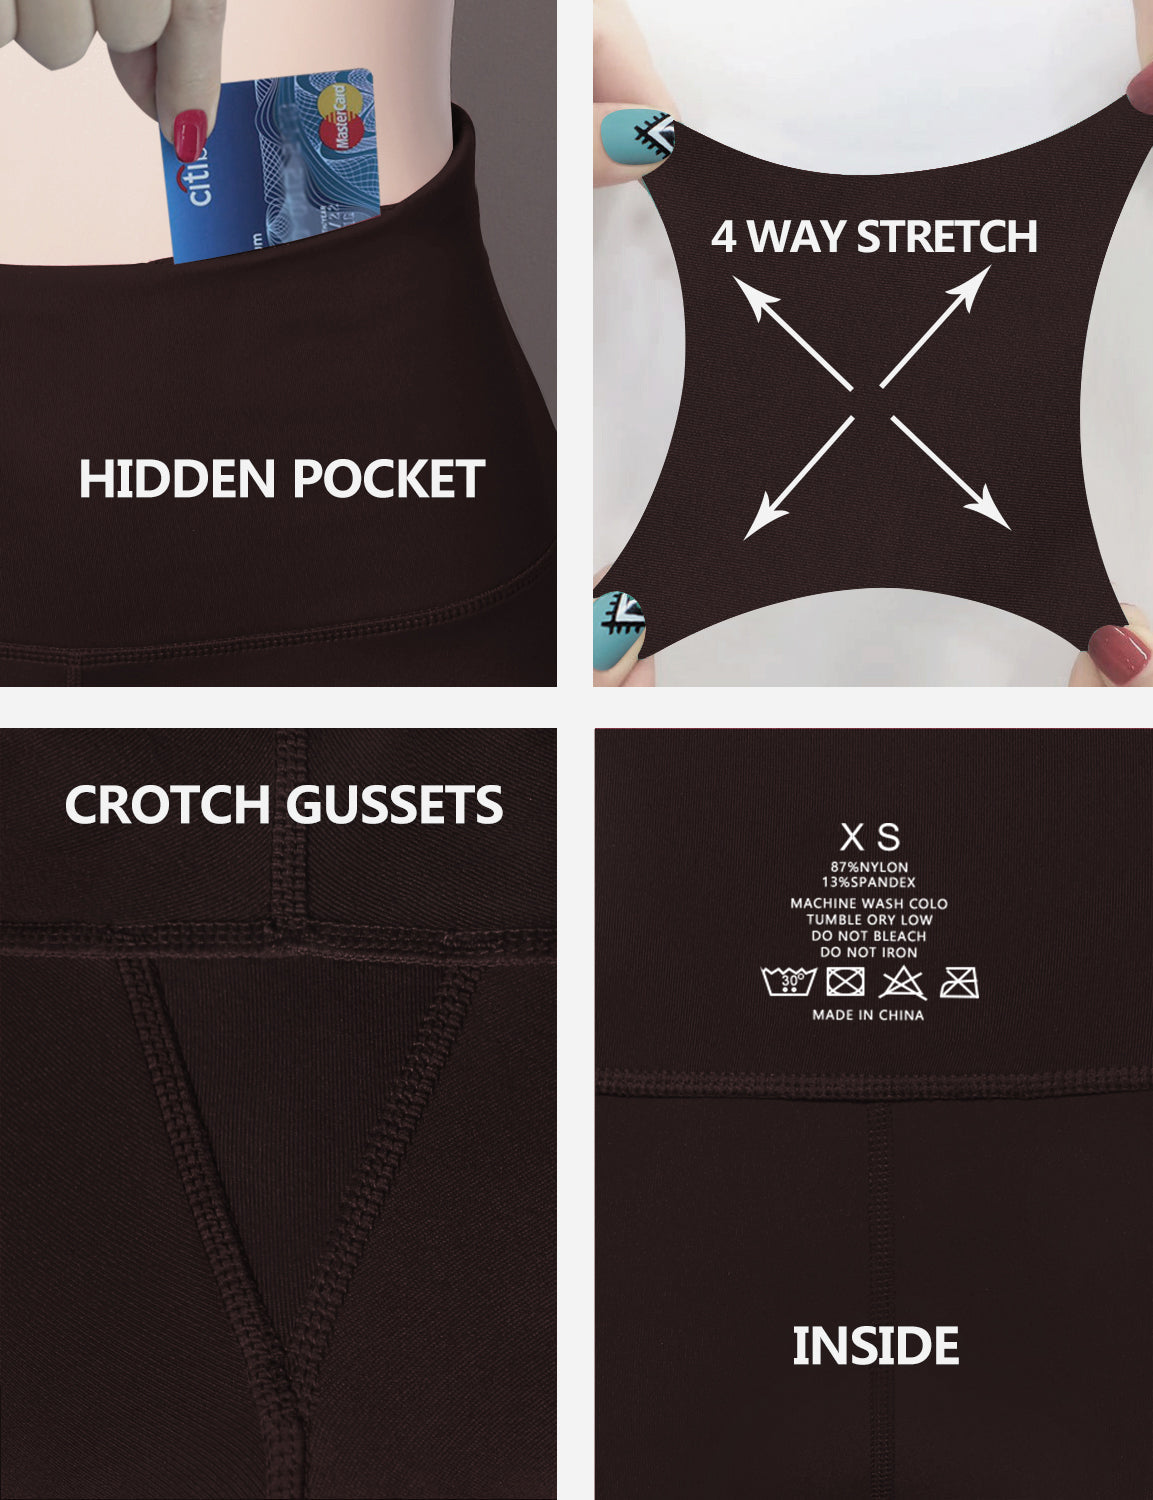 Back Pockets Bootcut Leggings mahoganymaroon 87%Nylon/13%Spandex Fabric doesn't attract lint easily 4-way stretch No see-through Moisture-wicking Inner pocket Four lengths